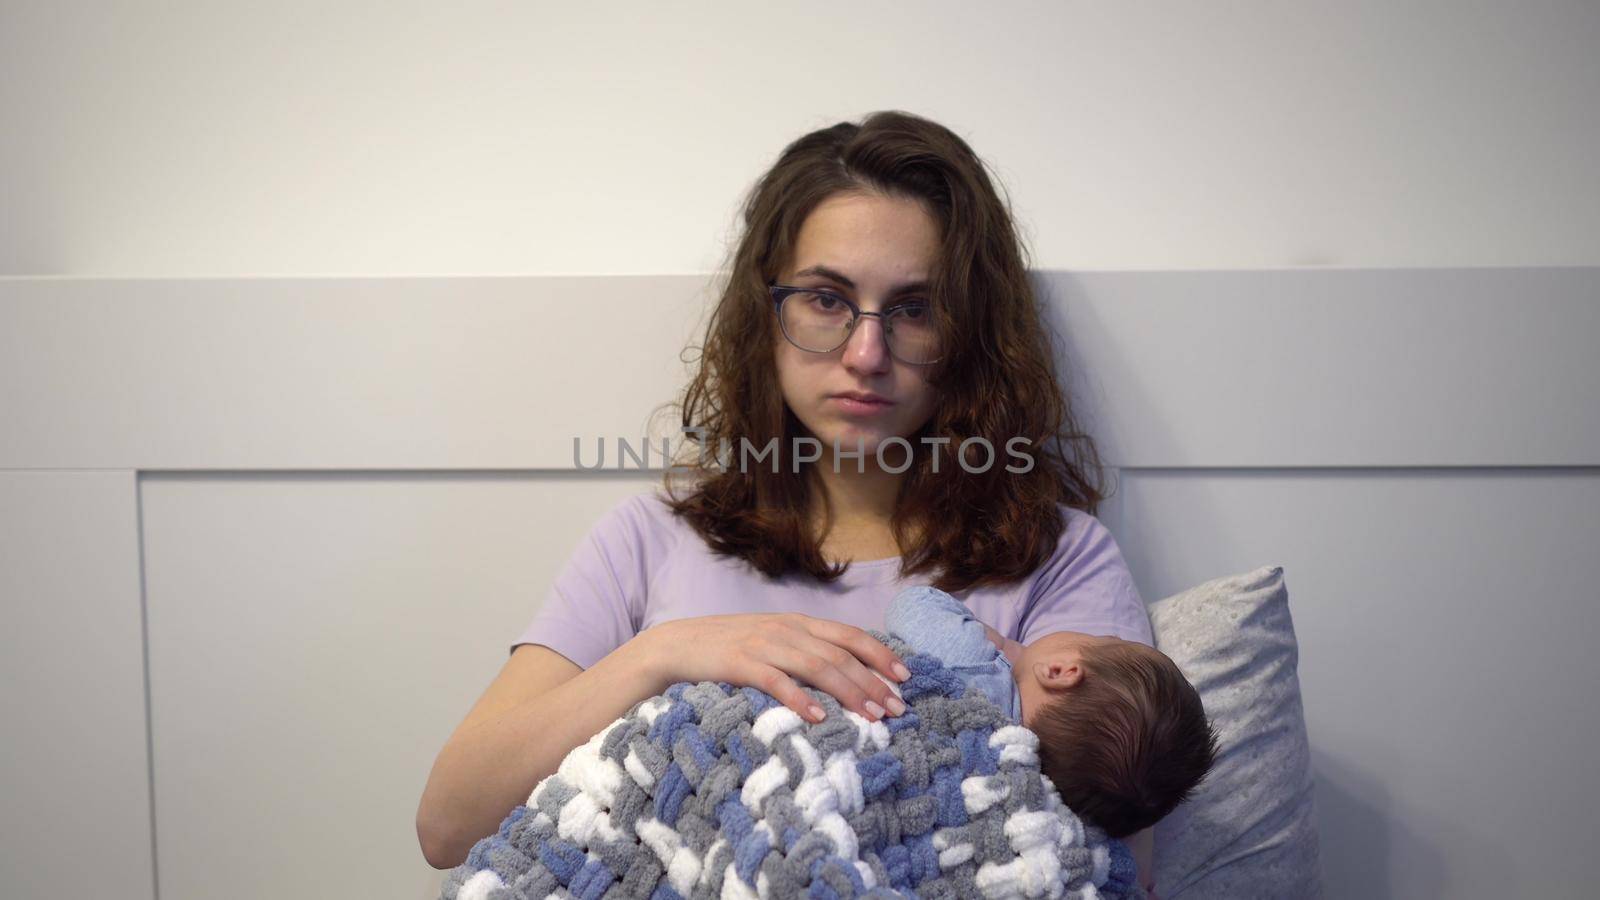 An exhausted young mother cradles a child in her arms in bed. A woman with a frenzied tired look with a newborn in her arms. 4k